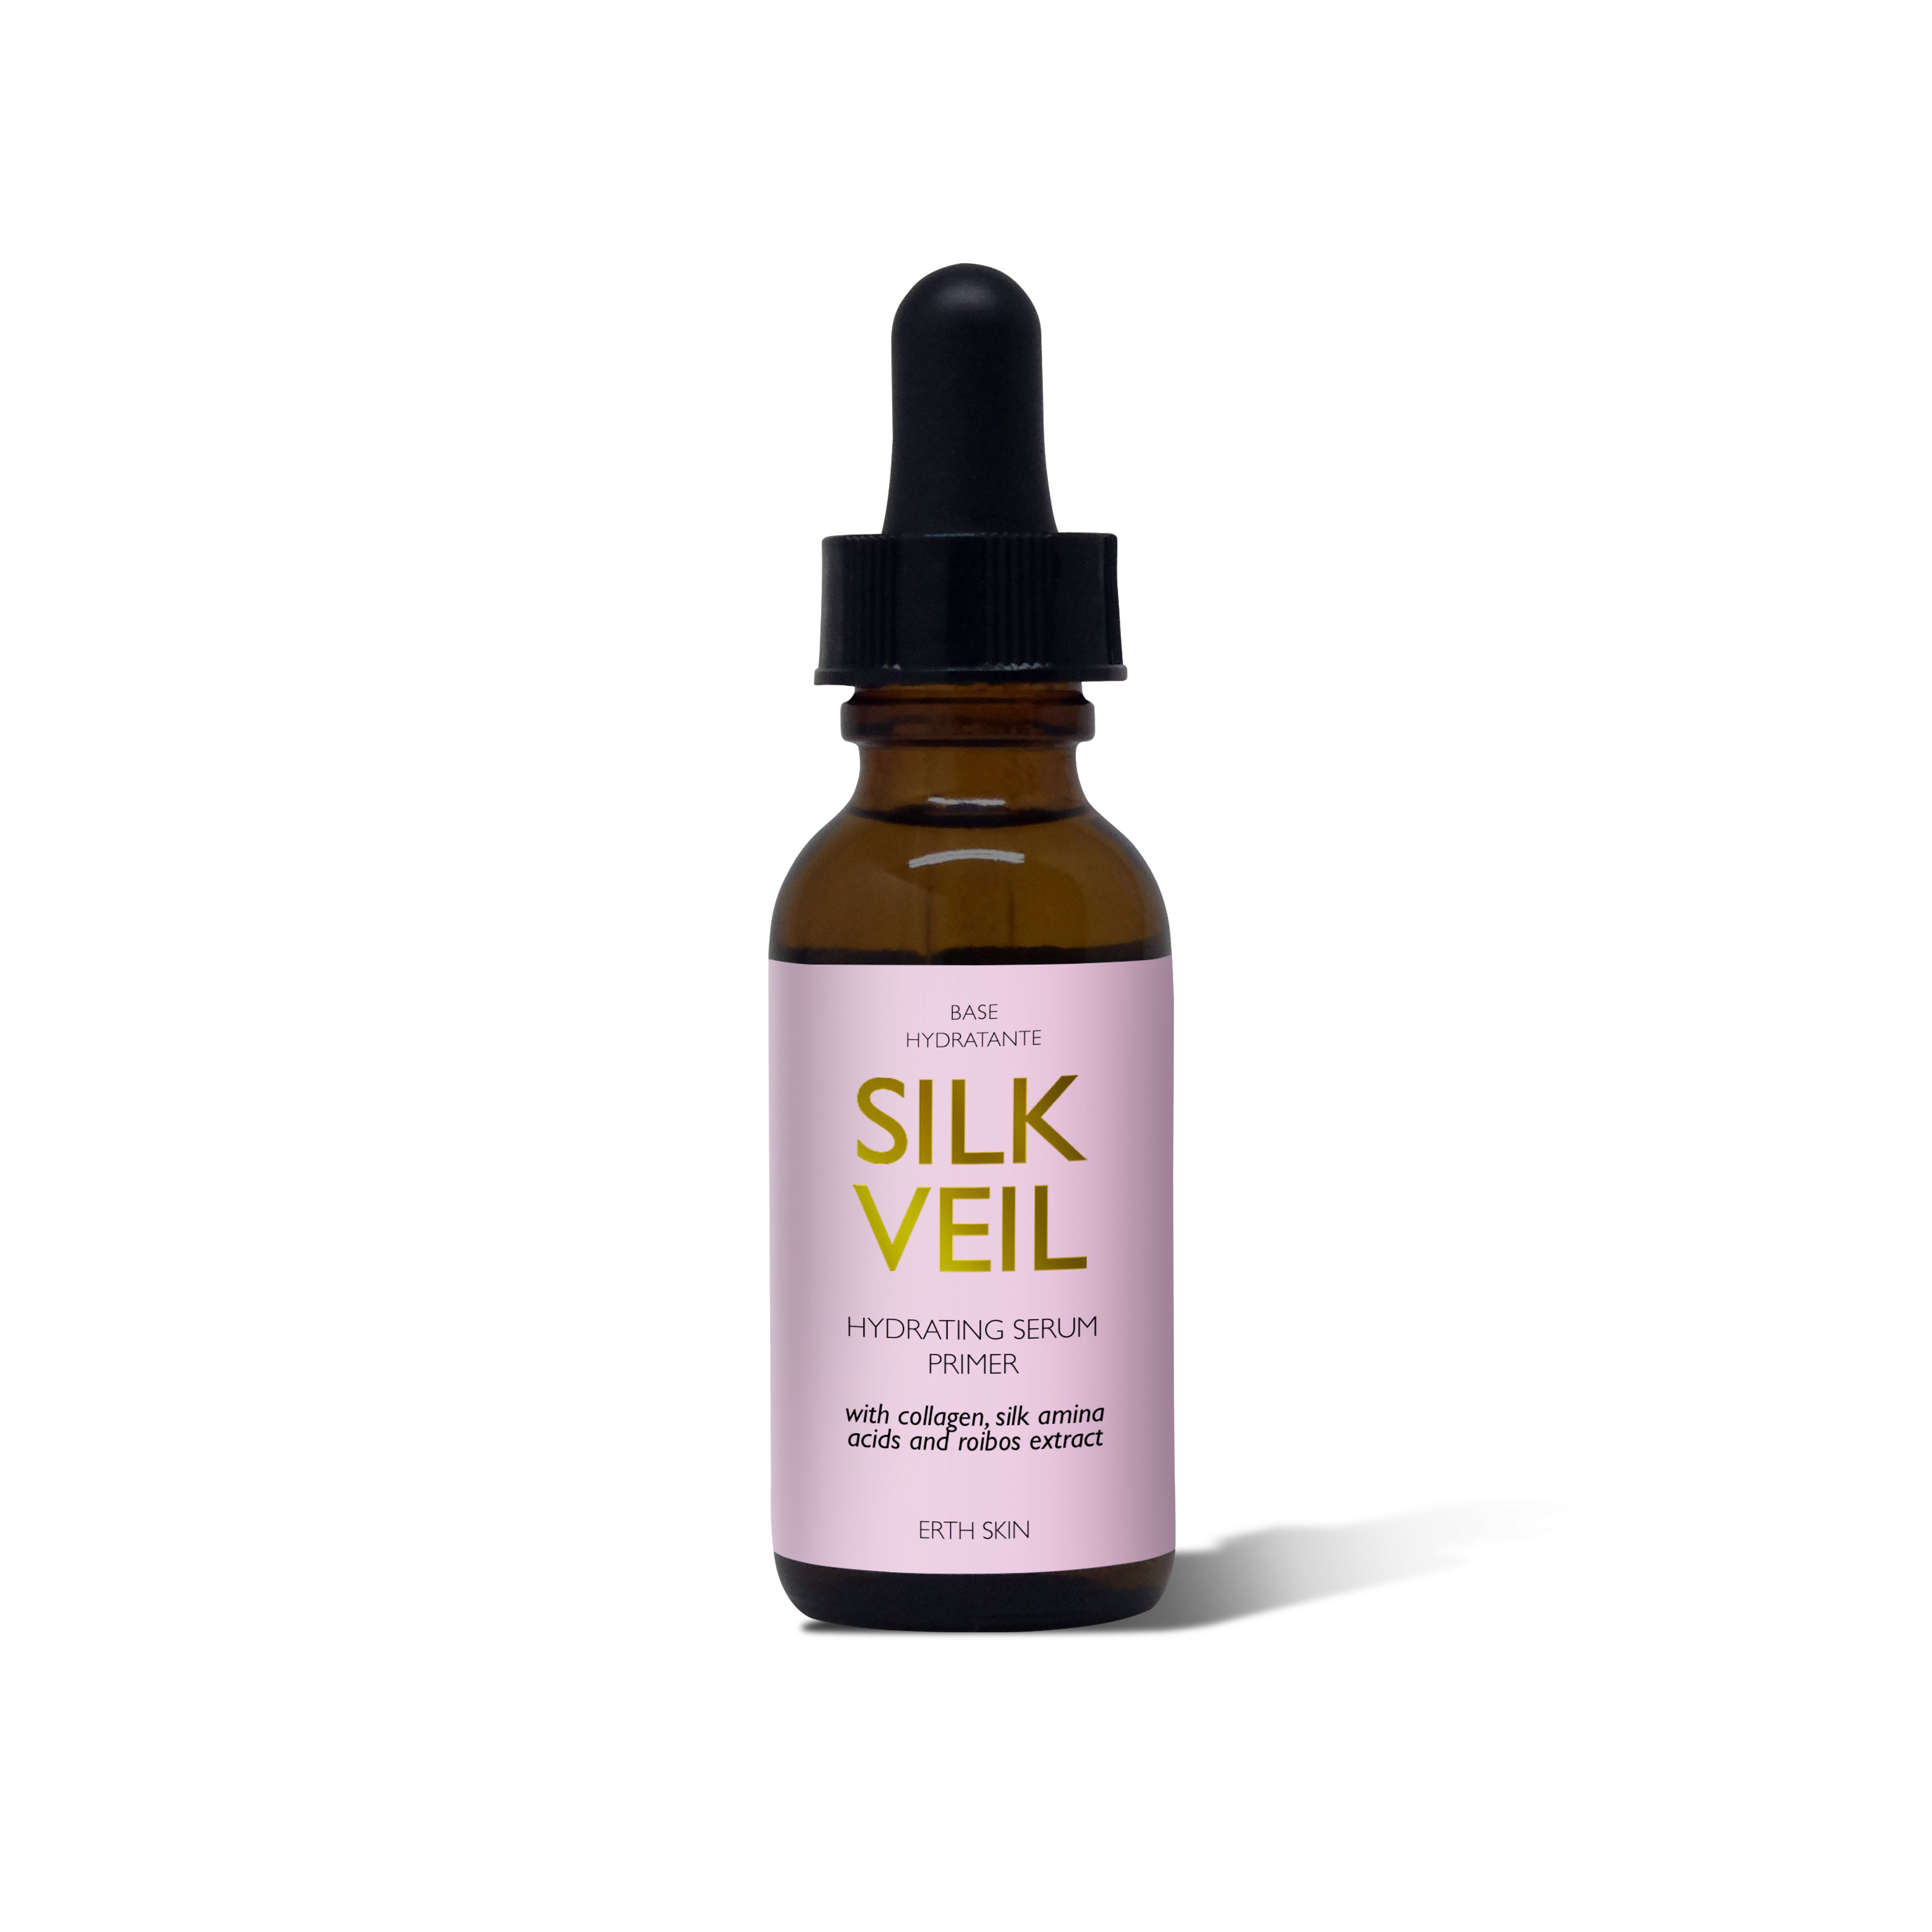 SILK VEIL Silky Serum Primer is hydrating serum to use before makeup or moisturiser. Silky hydration veils your skin to ultimate smoothes, preps skin for moisturiser or makeup leaving the skin ultra satin matte.
98% natural ingredients
hydrated, radiant and velvety smooth looking skin
replenishes dry skin and dehydrated skin
Perfect base for makeup or before moisturiser
Usage: Usage: Apply pea-sized amount of the cream on cleansed face, neckline and neck in the morning and evening. Caution: Discontinue to use if redness or irritation occurs. Avoid direct contact with eyes. Do not ingest.